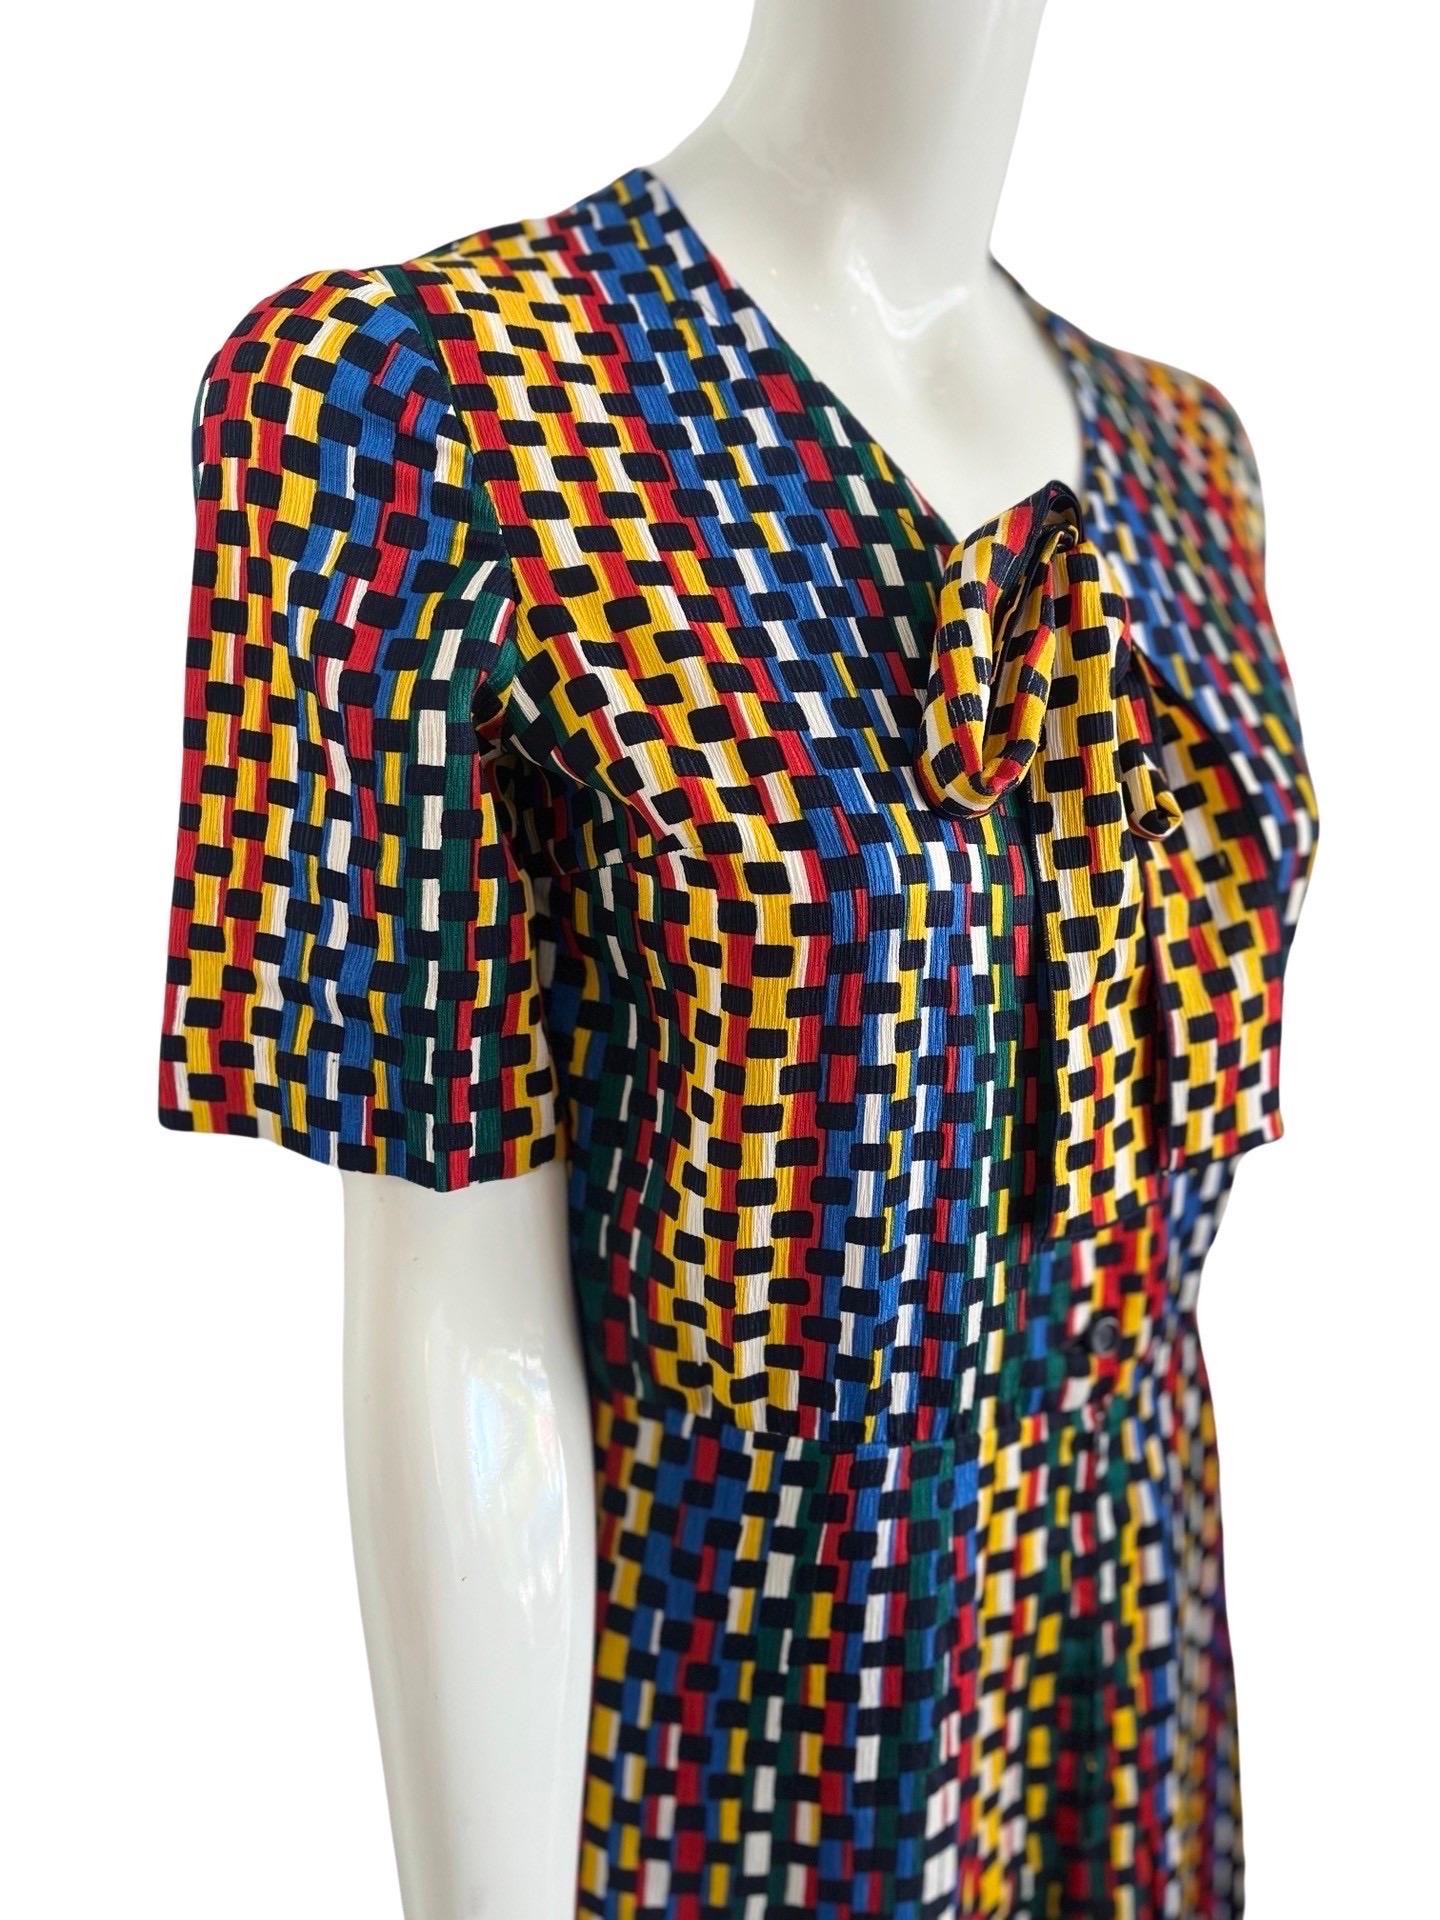 1970s Lanvin secretary dress in a bright mix of  primary colors in a sort of abstract layered brick print.  The fabric is polyester, as was popular by Lanvin in the day, however it feels close to a crepe silk and falls nicely.  The dress has a half